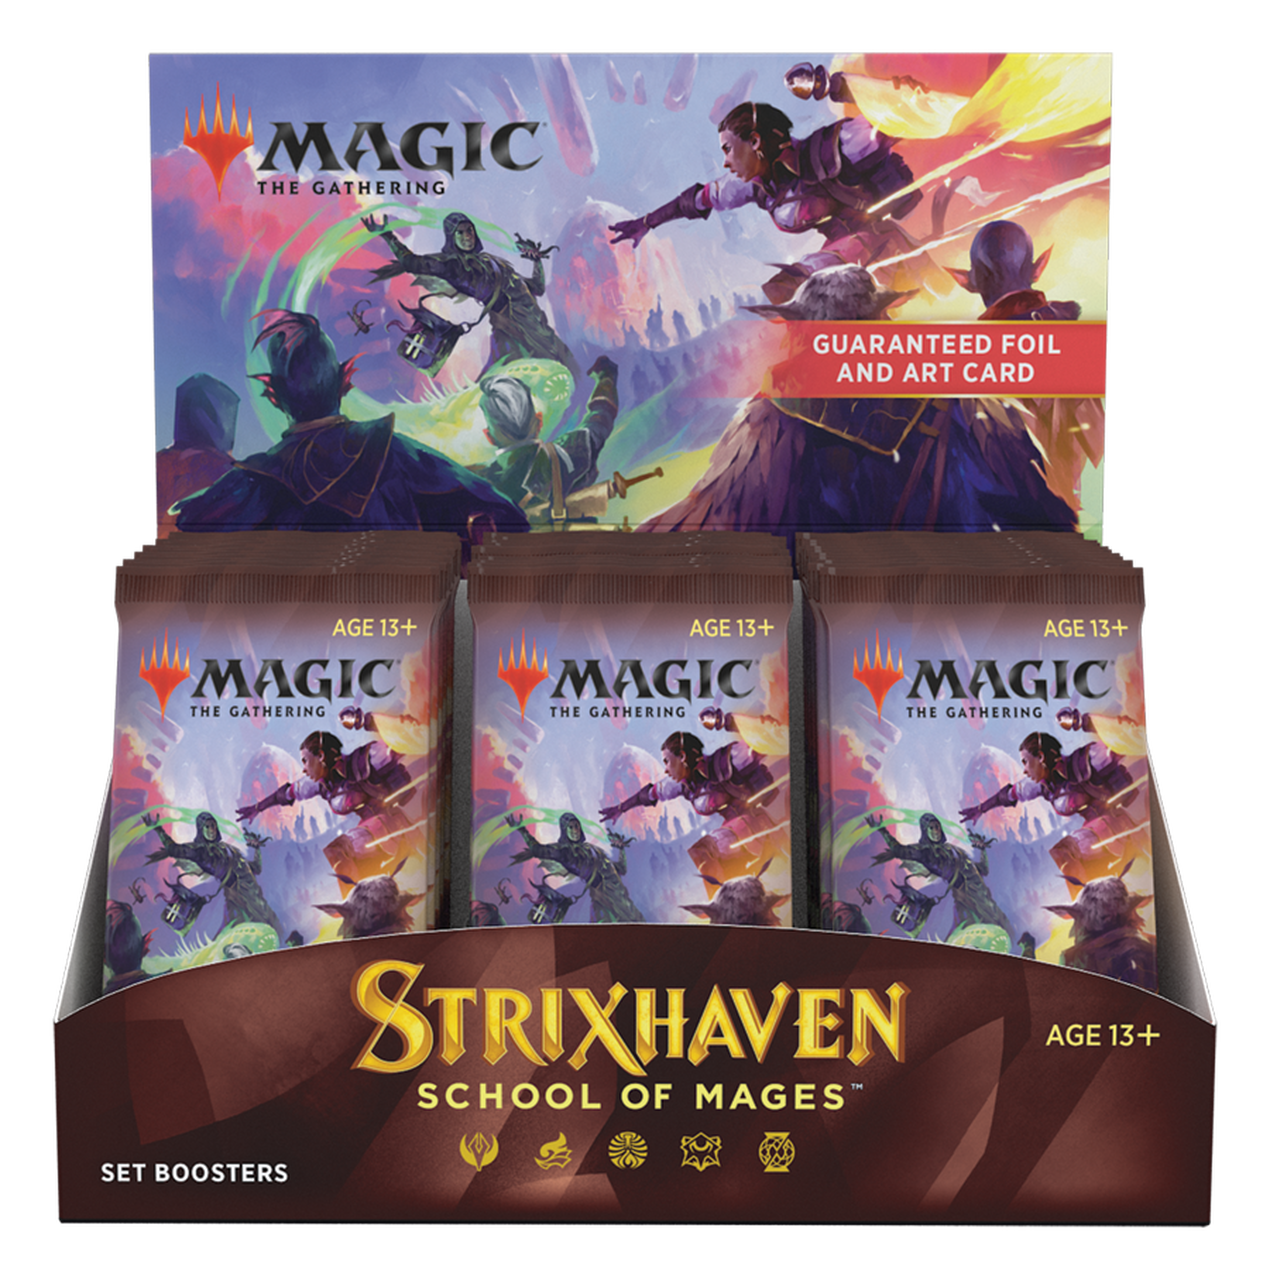 MTG - Strixhaven - Set Booster Box - Magic: The Gathering - The Hooded Goblin